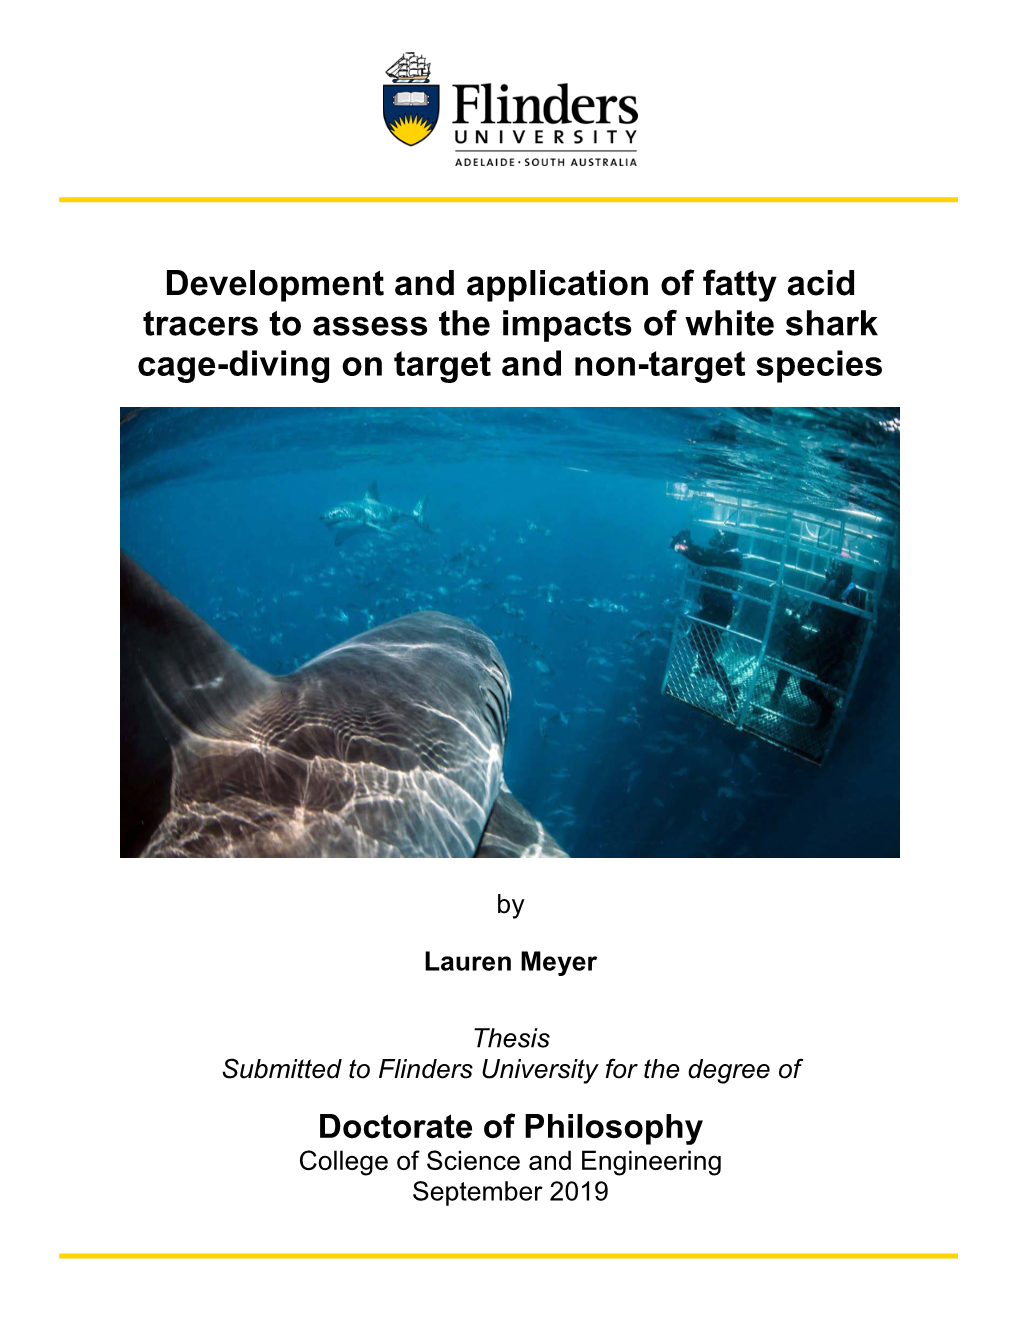 Development and Application of Fatty Acid Tracers to Assess the Impacts of White Shark Cage-Diving on Target and Non-Target Species